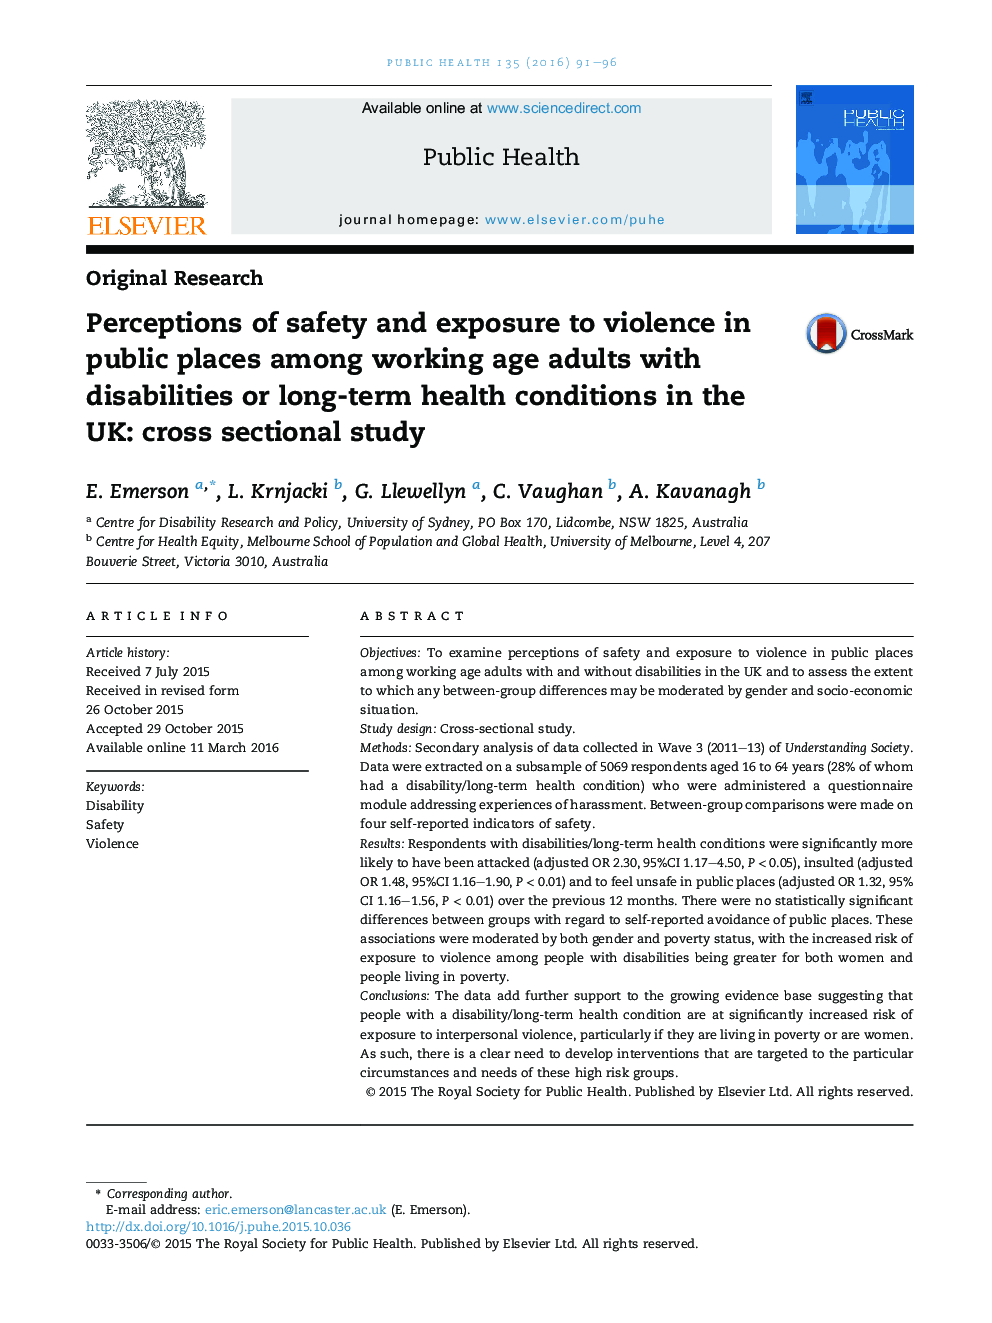 Perceptions of safety and exposure to violence in public places among working age adults with disabilities or long-term health conditions in the UK: cross sectional study